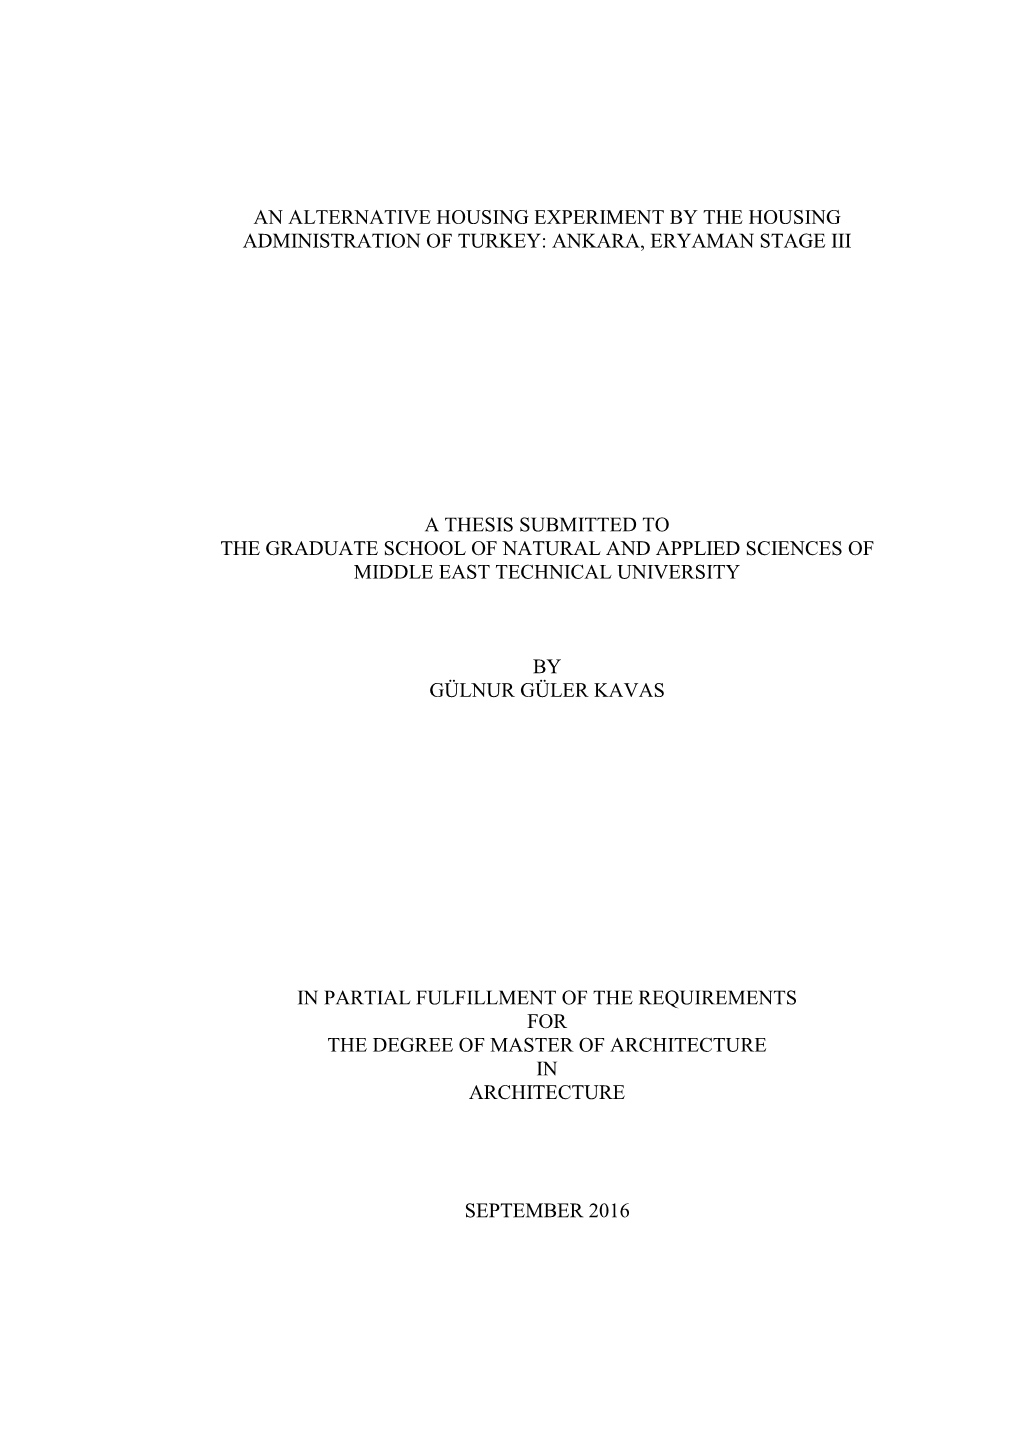 Ankara, Eryaman Stage Iii a Thesis Submitted to the G